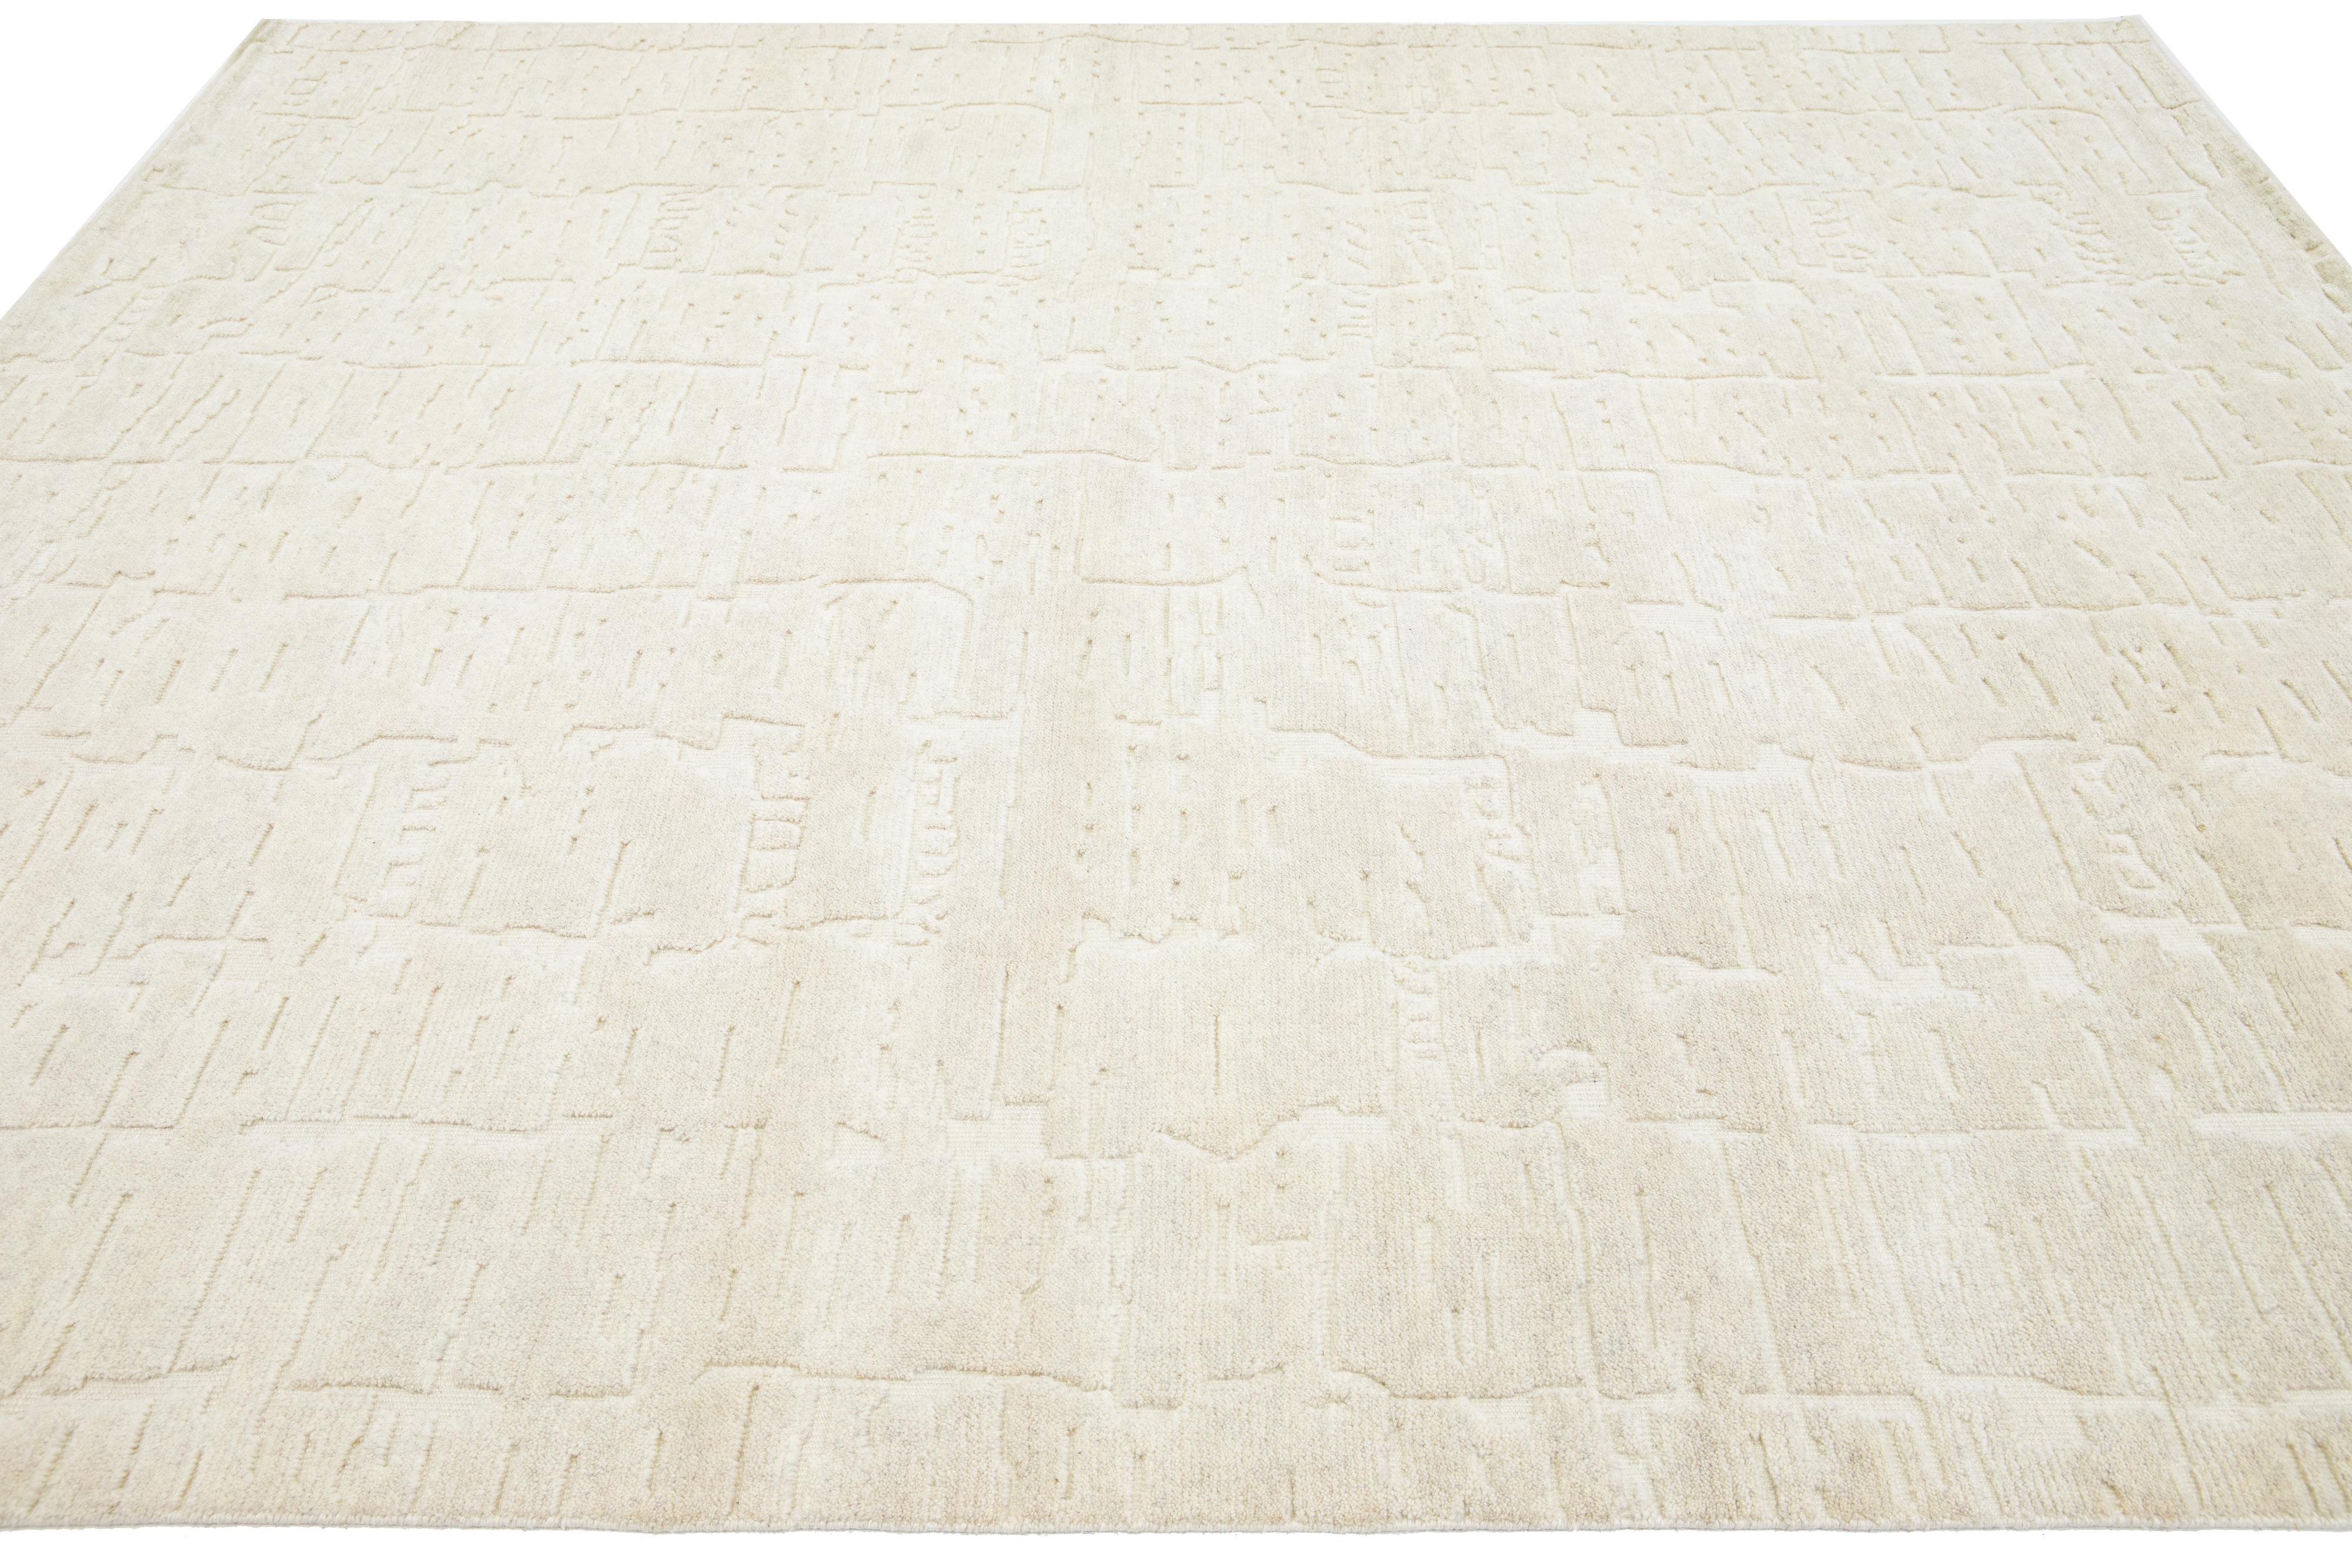 Hand-Knotted Minimalist Contemporary Moroccan Style Wool Rug In ivory by Apadana  For Sale